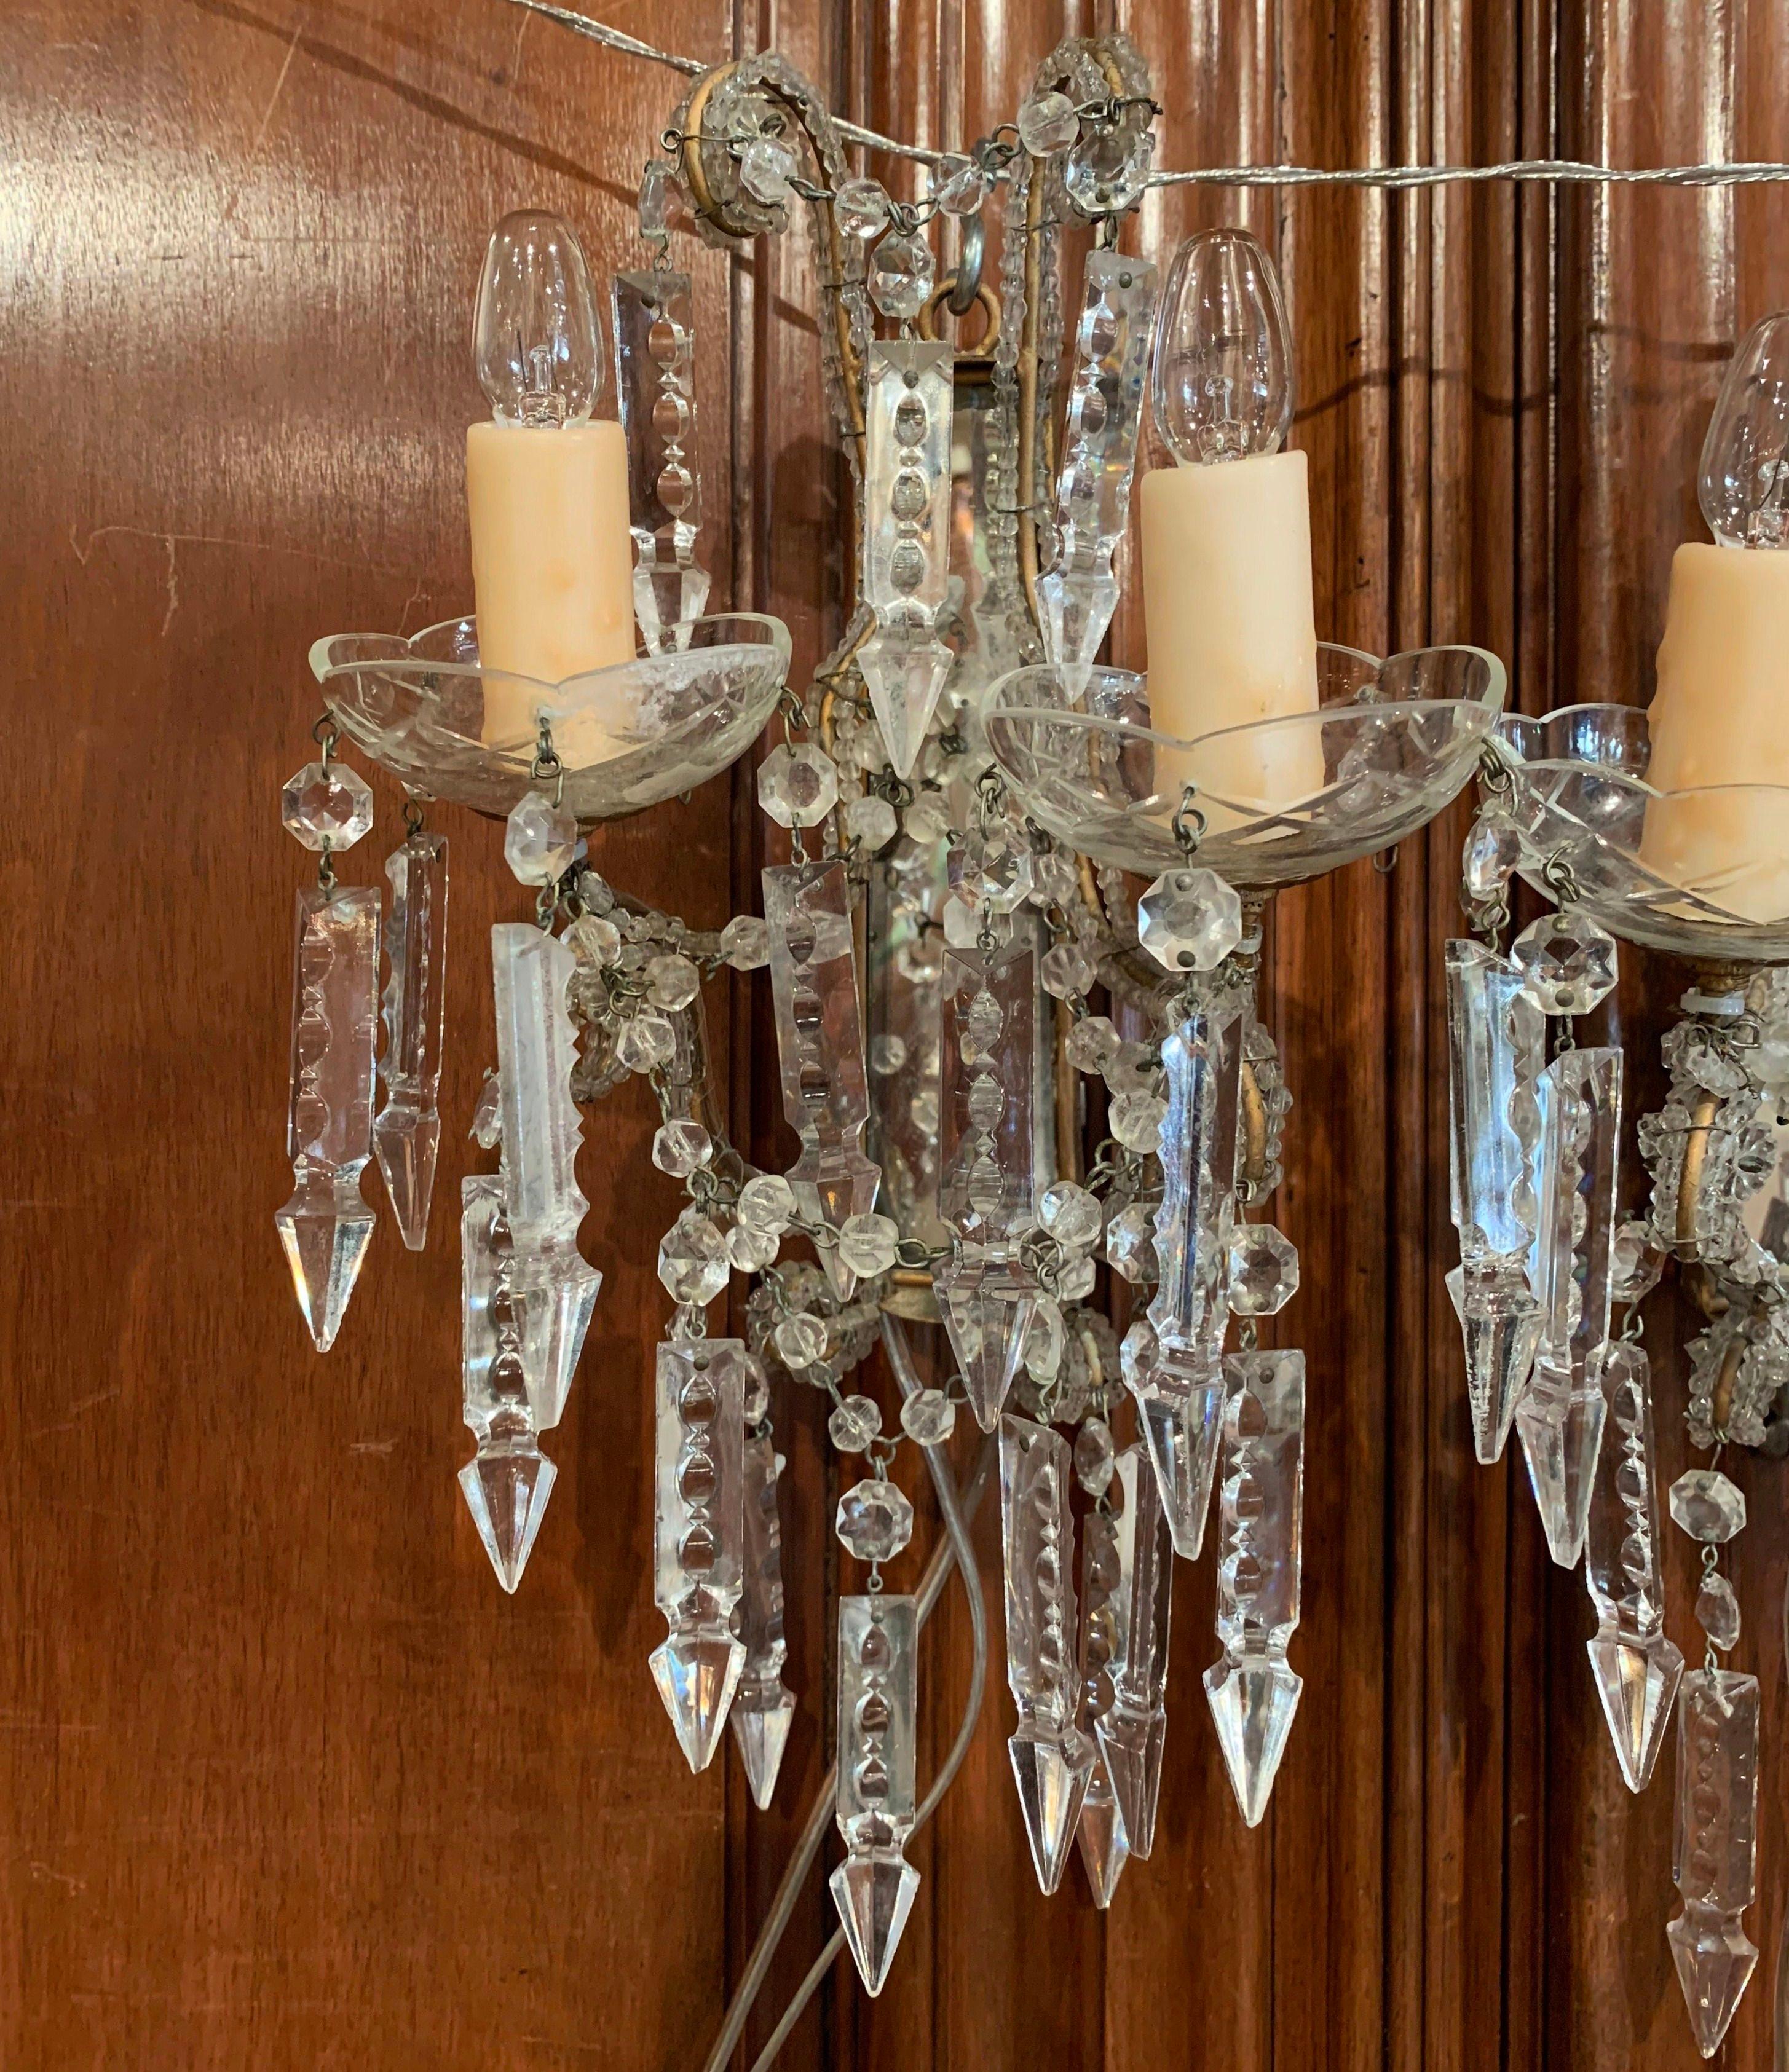 Bring elegance to a powder room with this pair of antique light fixtures; crafted in Italy circa 1920, each sconce with back mirror plate, features two arms newly wired embellished with wax candles, and decorated with cut crystal and pendants over